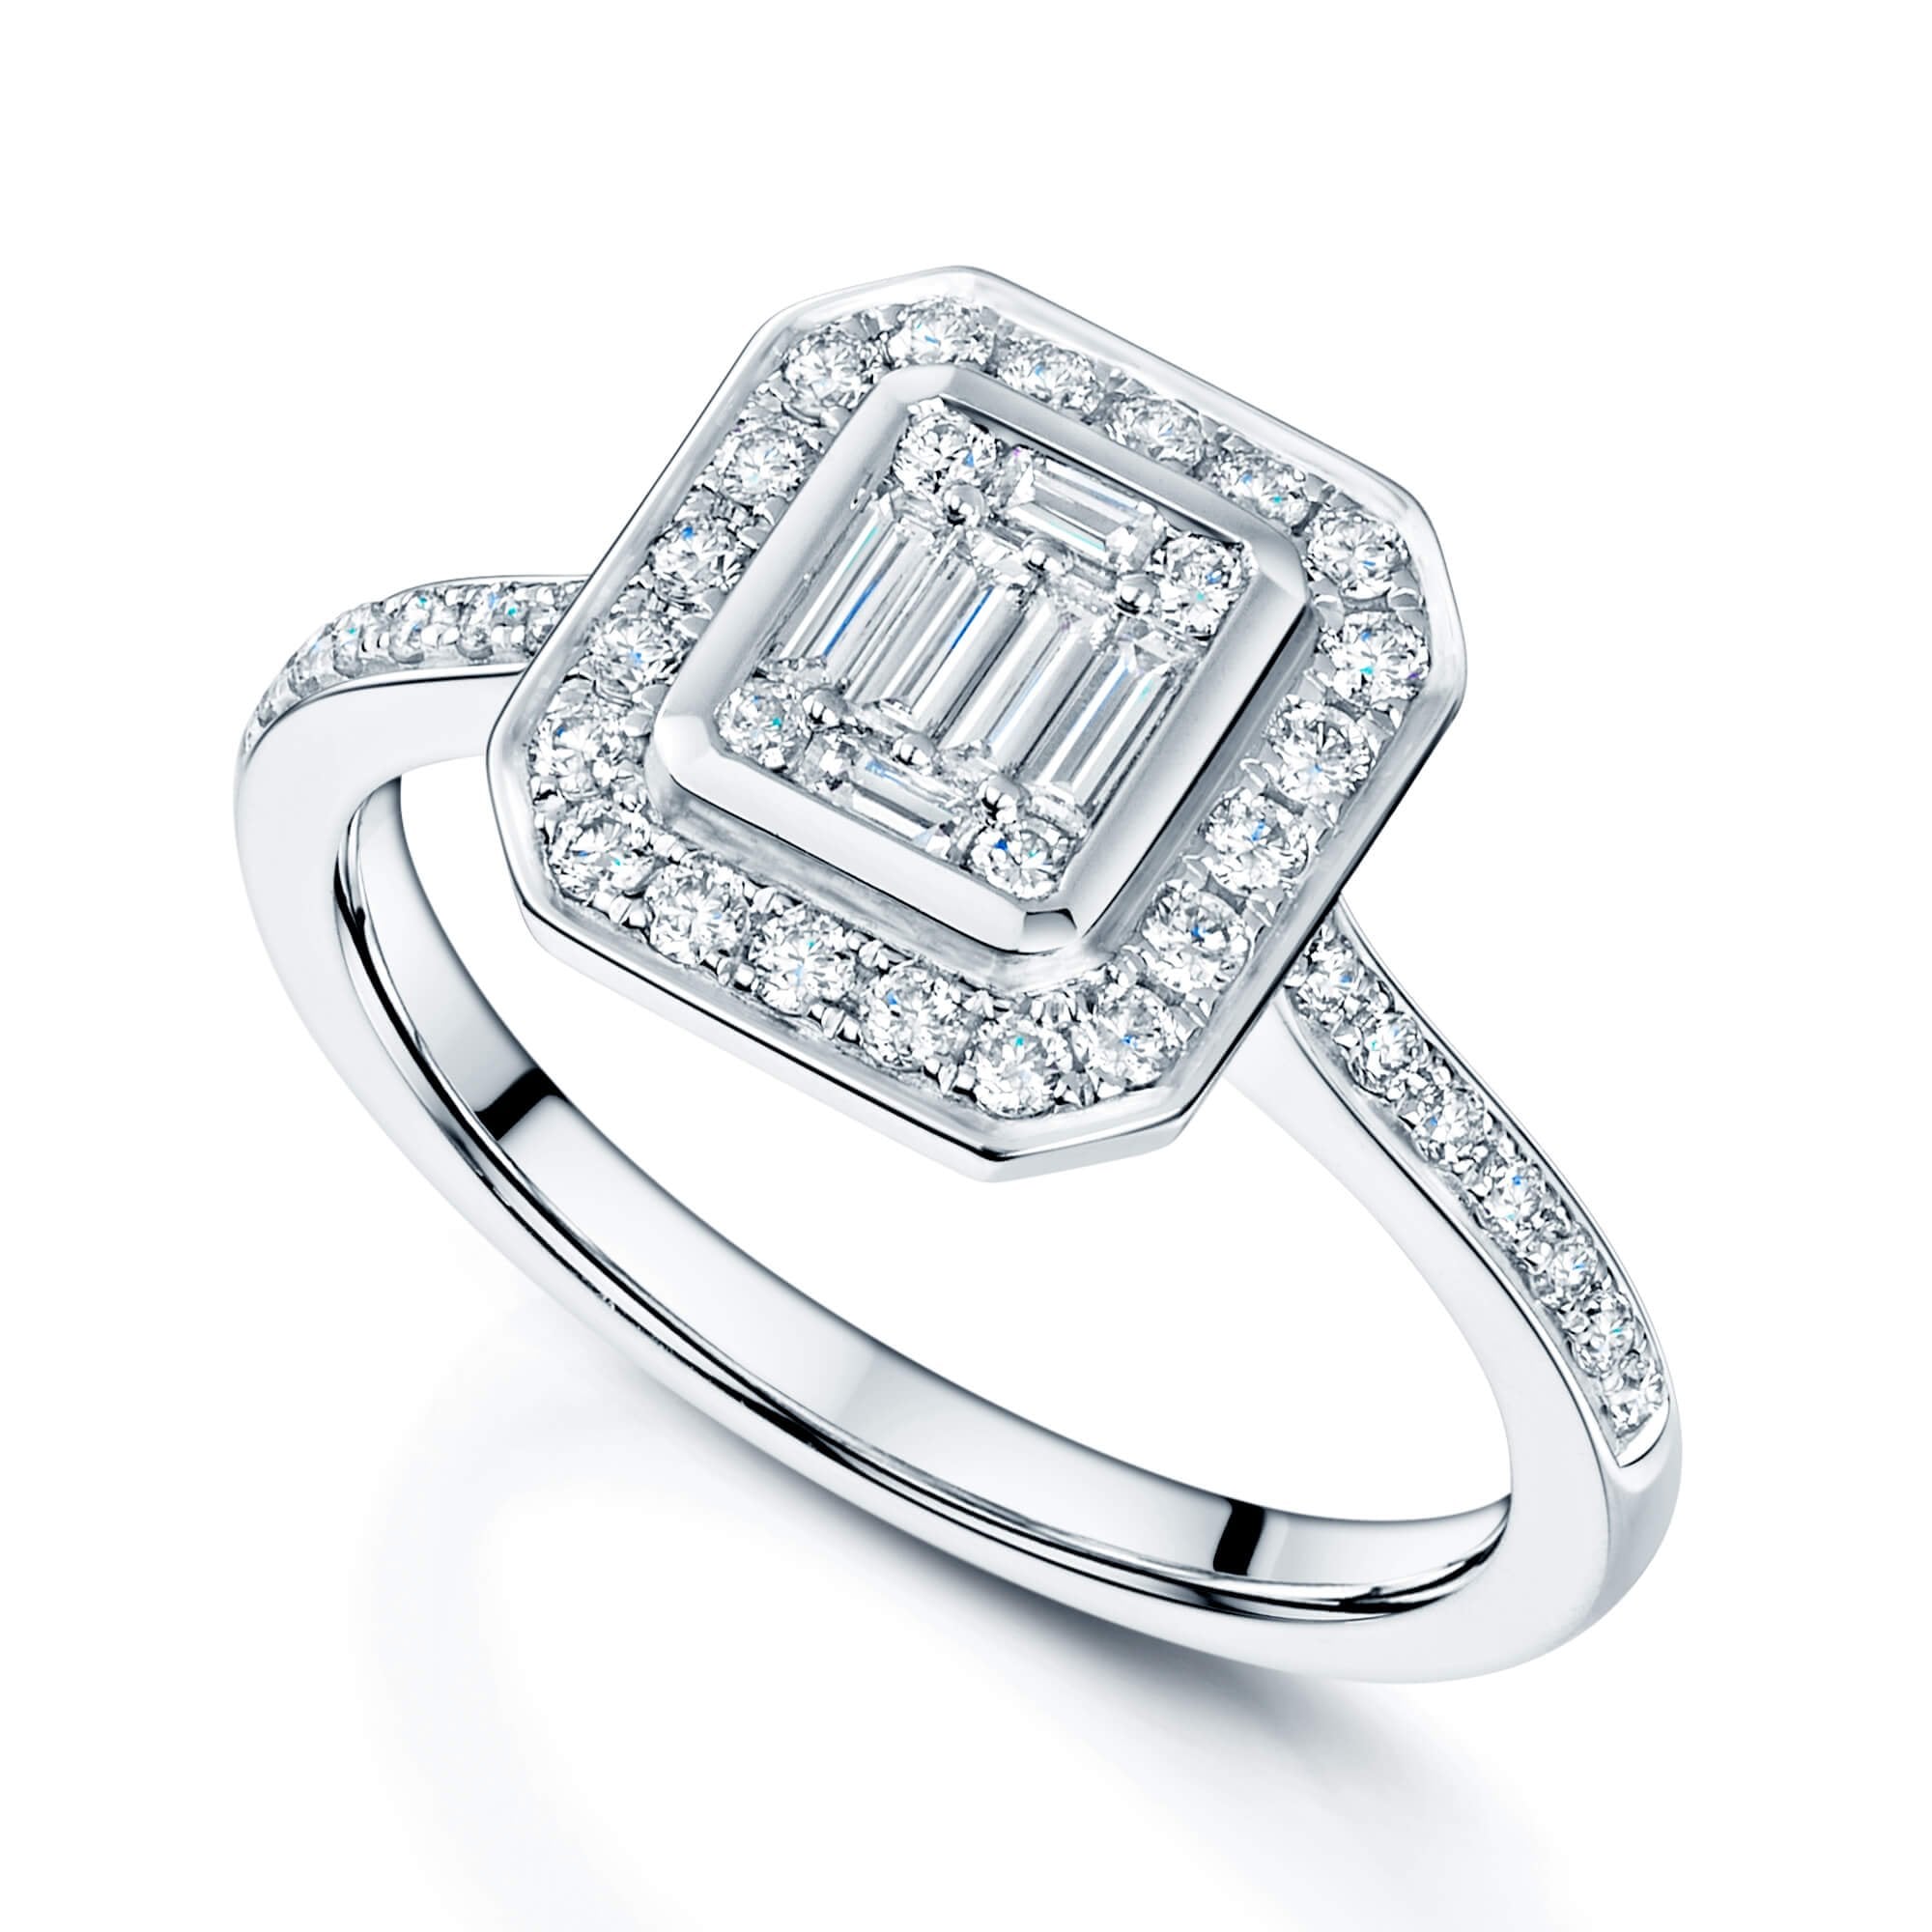 Platinum Round Brilliant And Baguette Cut Fancy Halo Diamond Ring With Diamond Shoulders